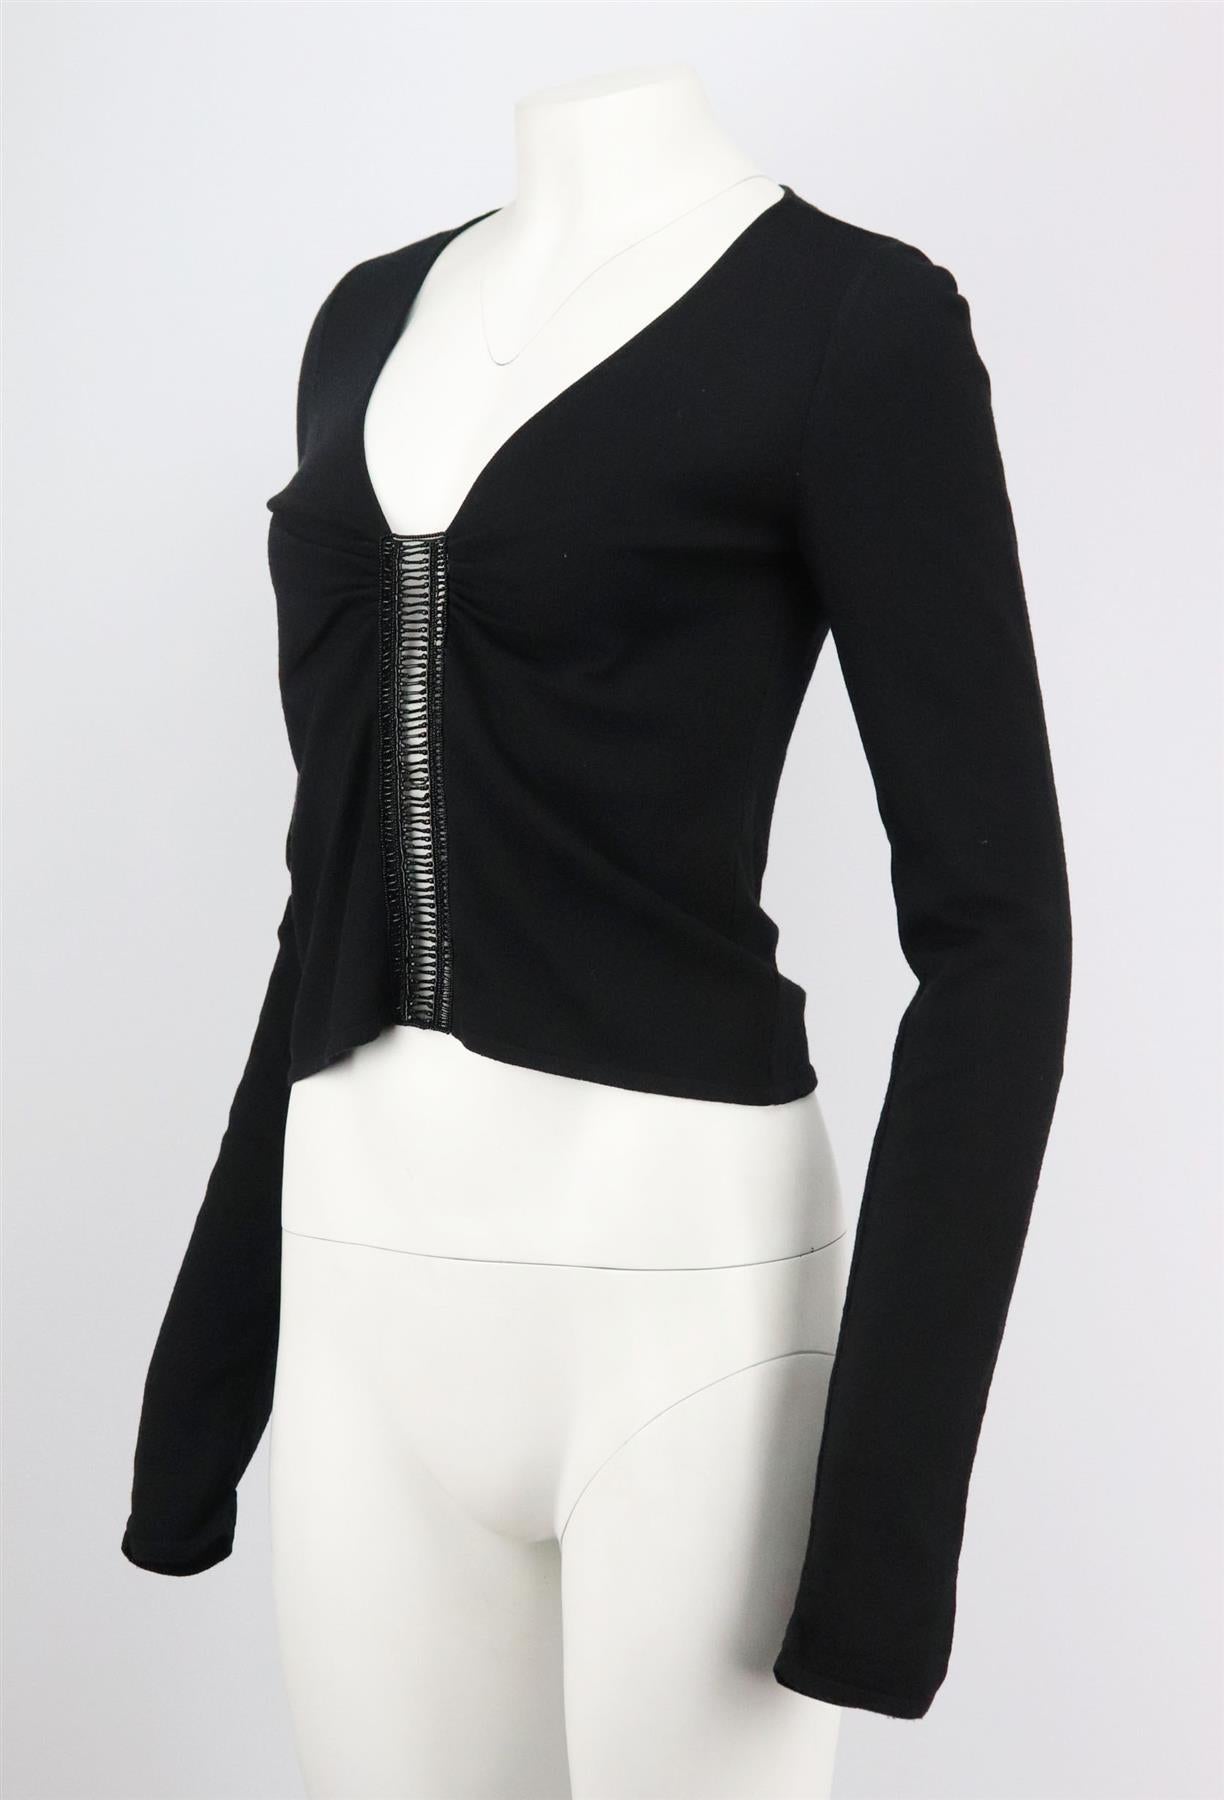 This vintage top by Valentino is made from bead embellished wool-blend, it is cut for a sexy silhouette with slightly cropped hem, plunging neckline and ruched detail at the front. Black wool-blend. Slips on. 80% Wool, 20% polyamide. Size: Medium